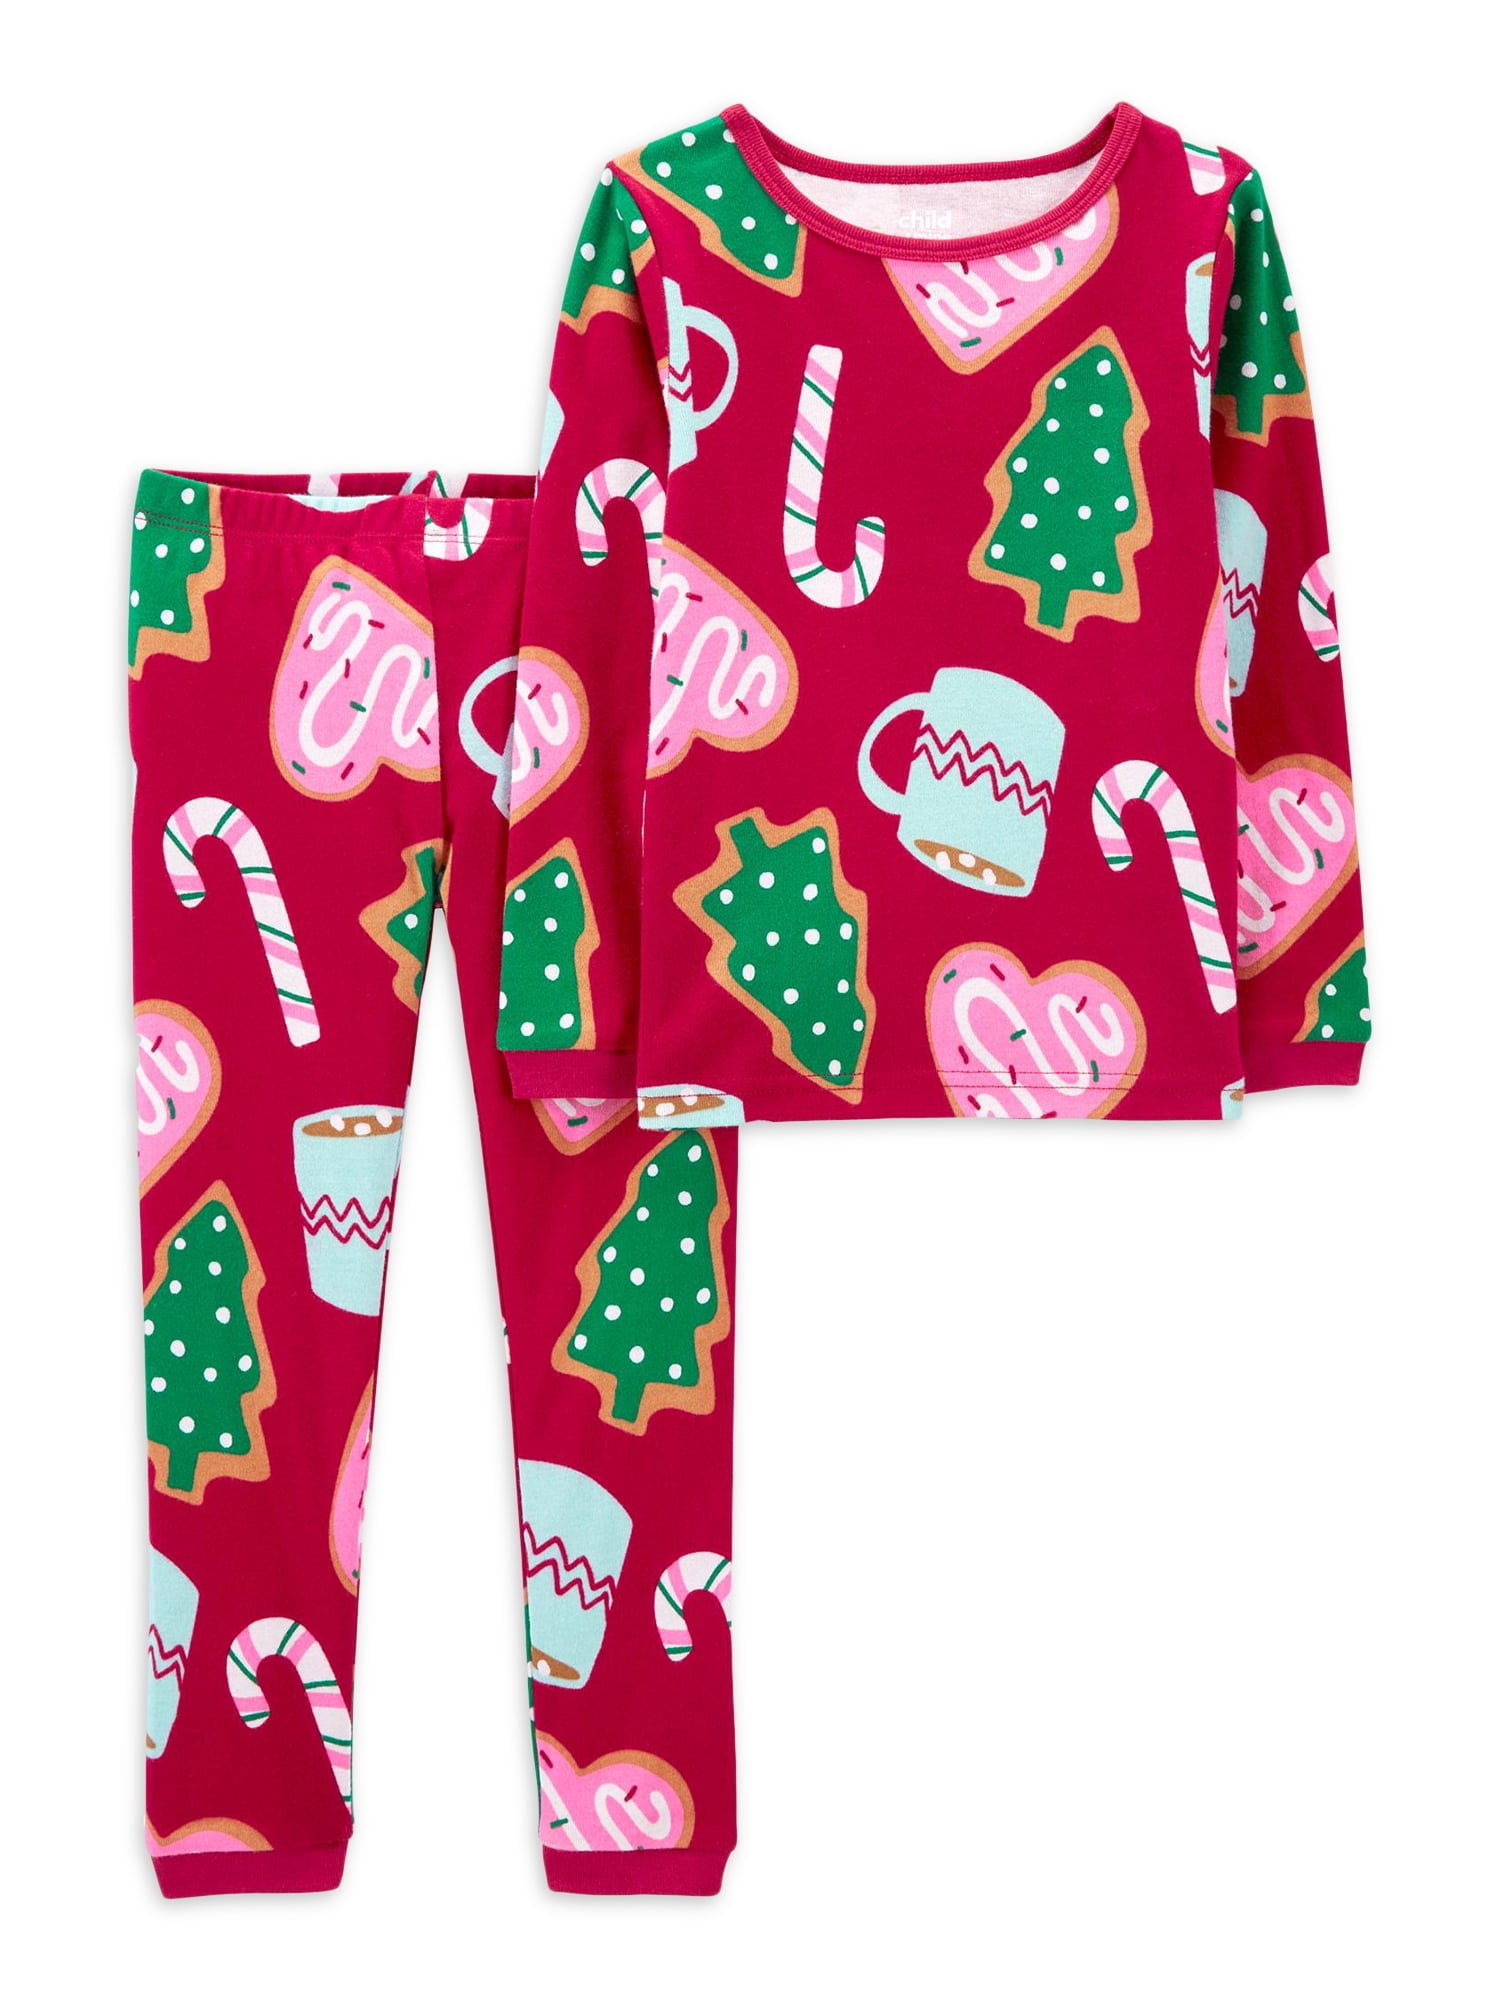 Carter's Child of Mine Baby and Toddler Holiday Pajamas, 2-Piece, Sizes 12M-5T